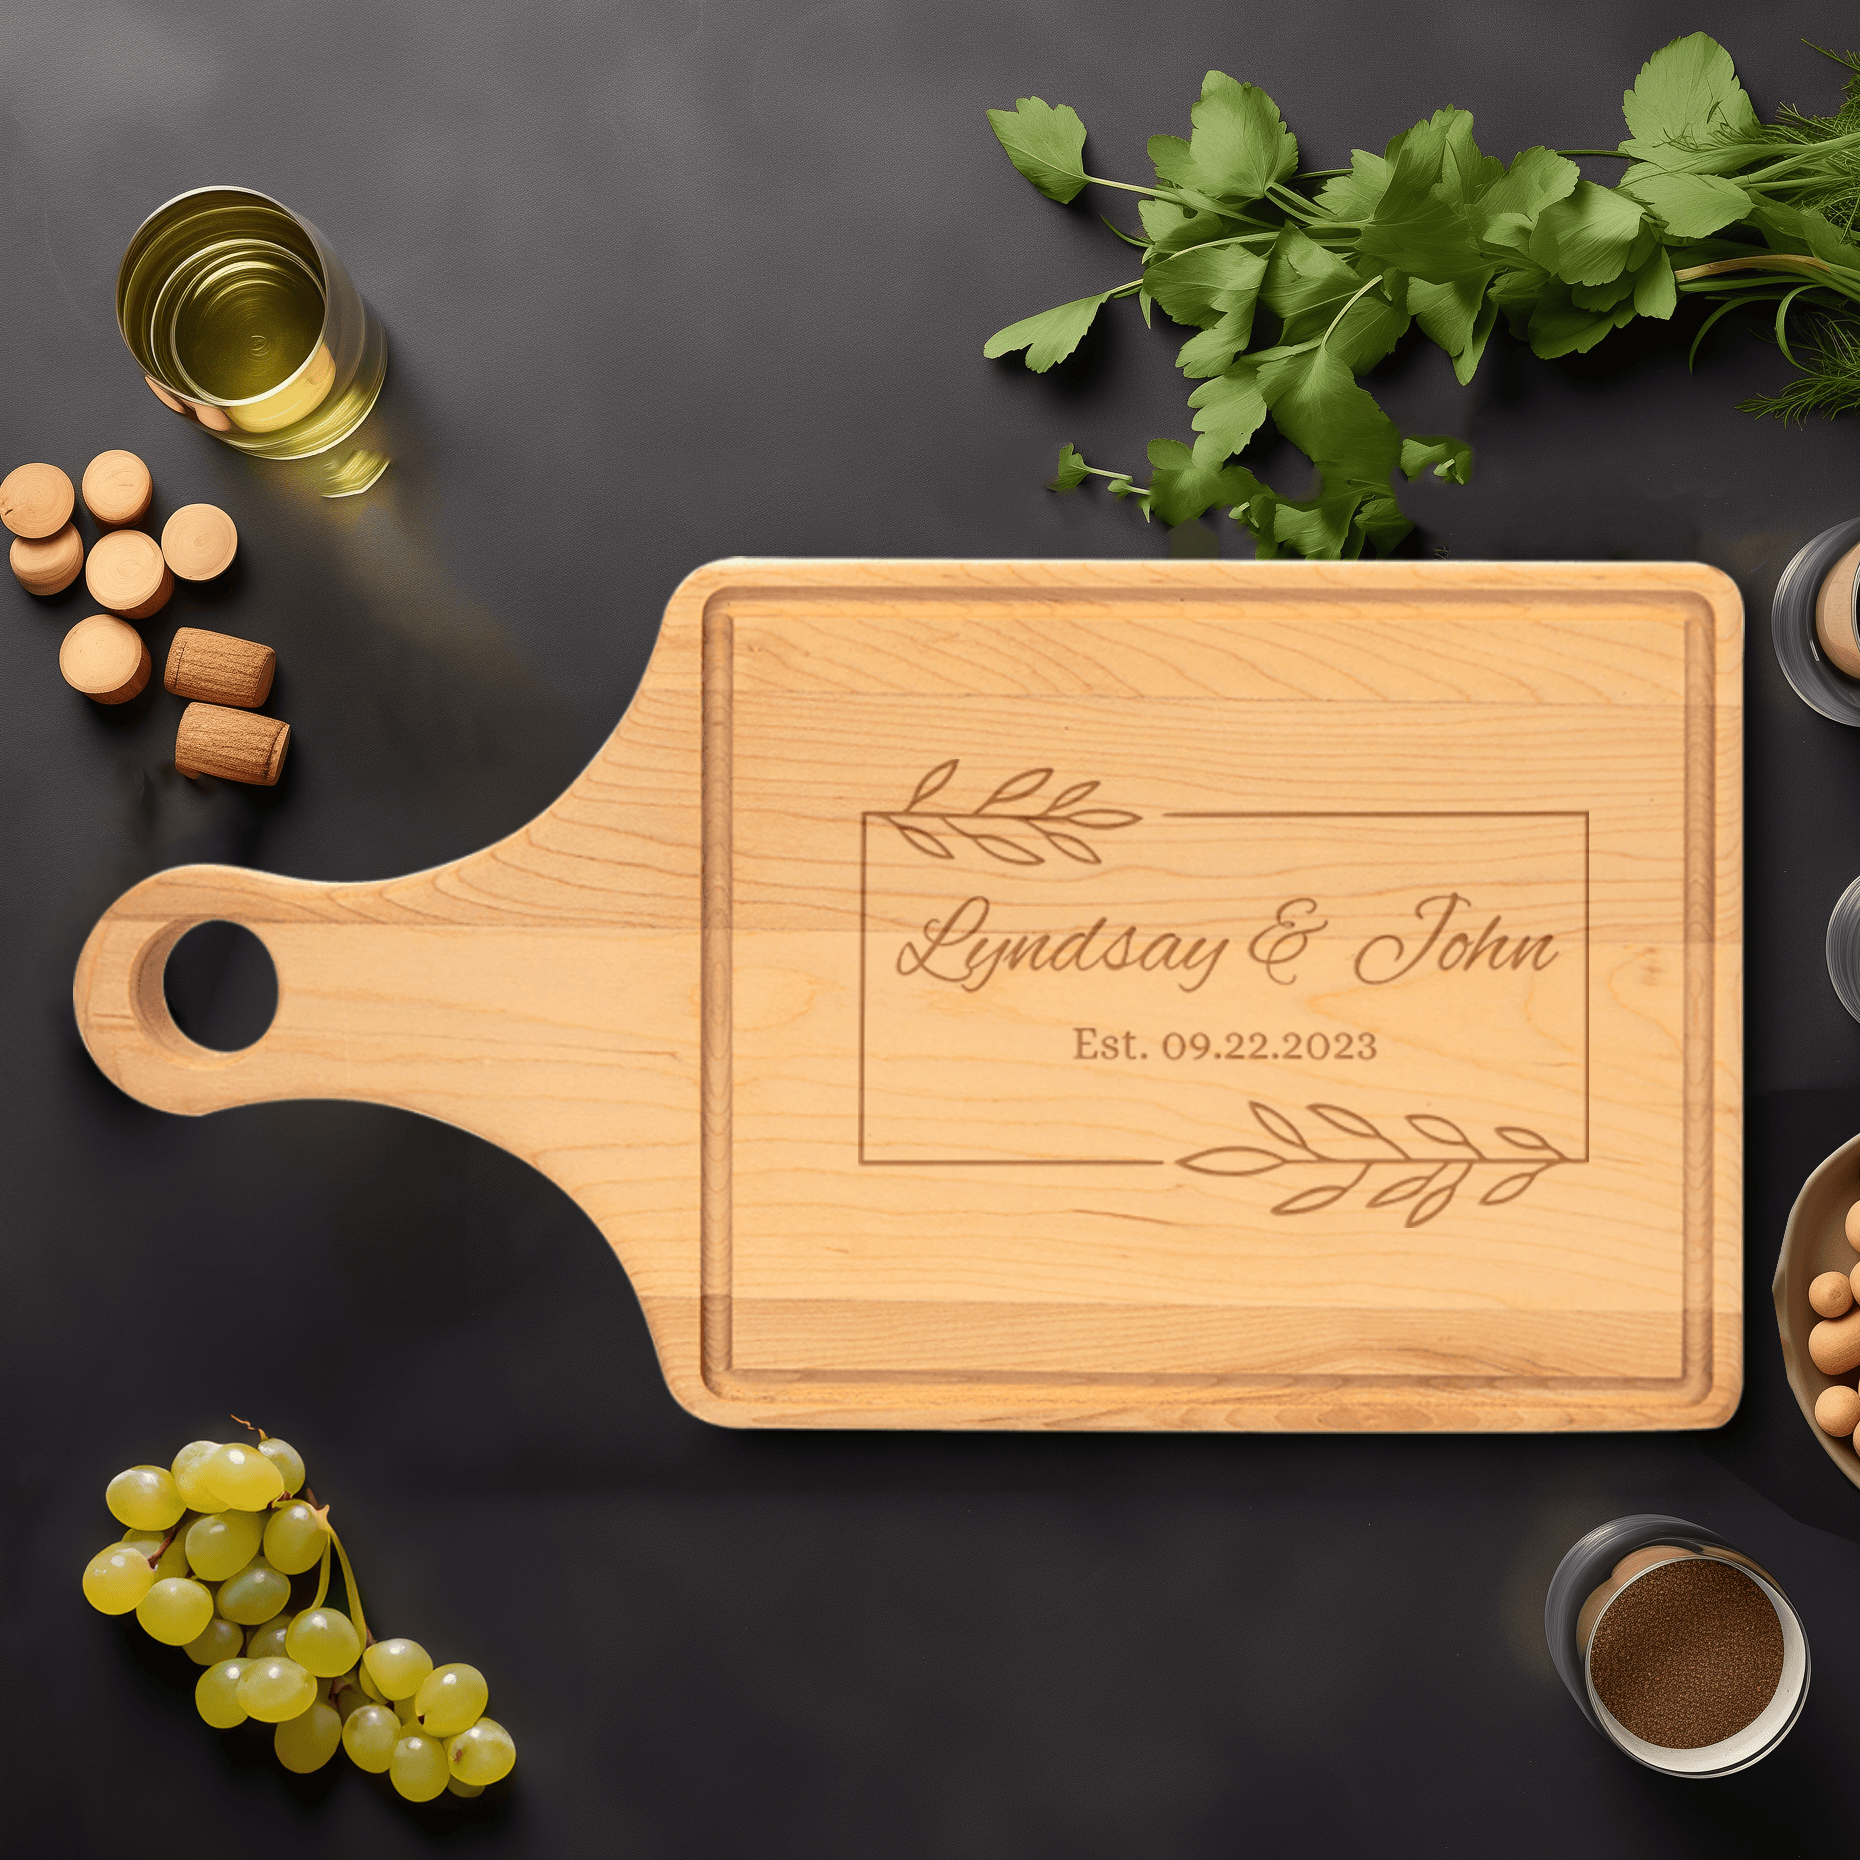 Anniversary Maple Paddle Cutting Board With Love Entwined Design